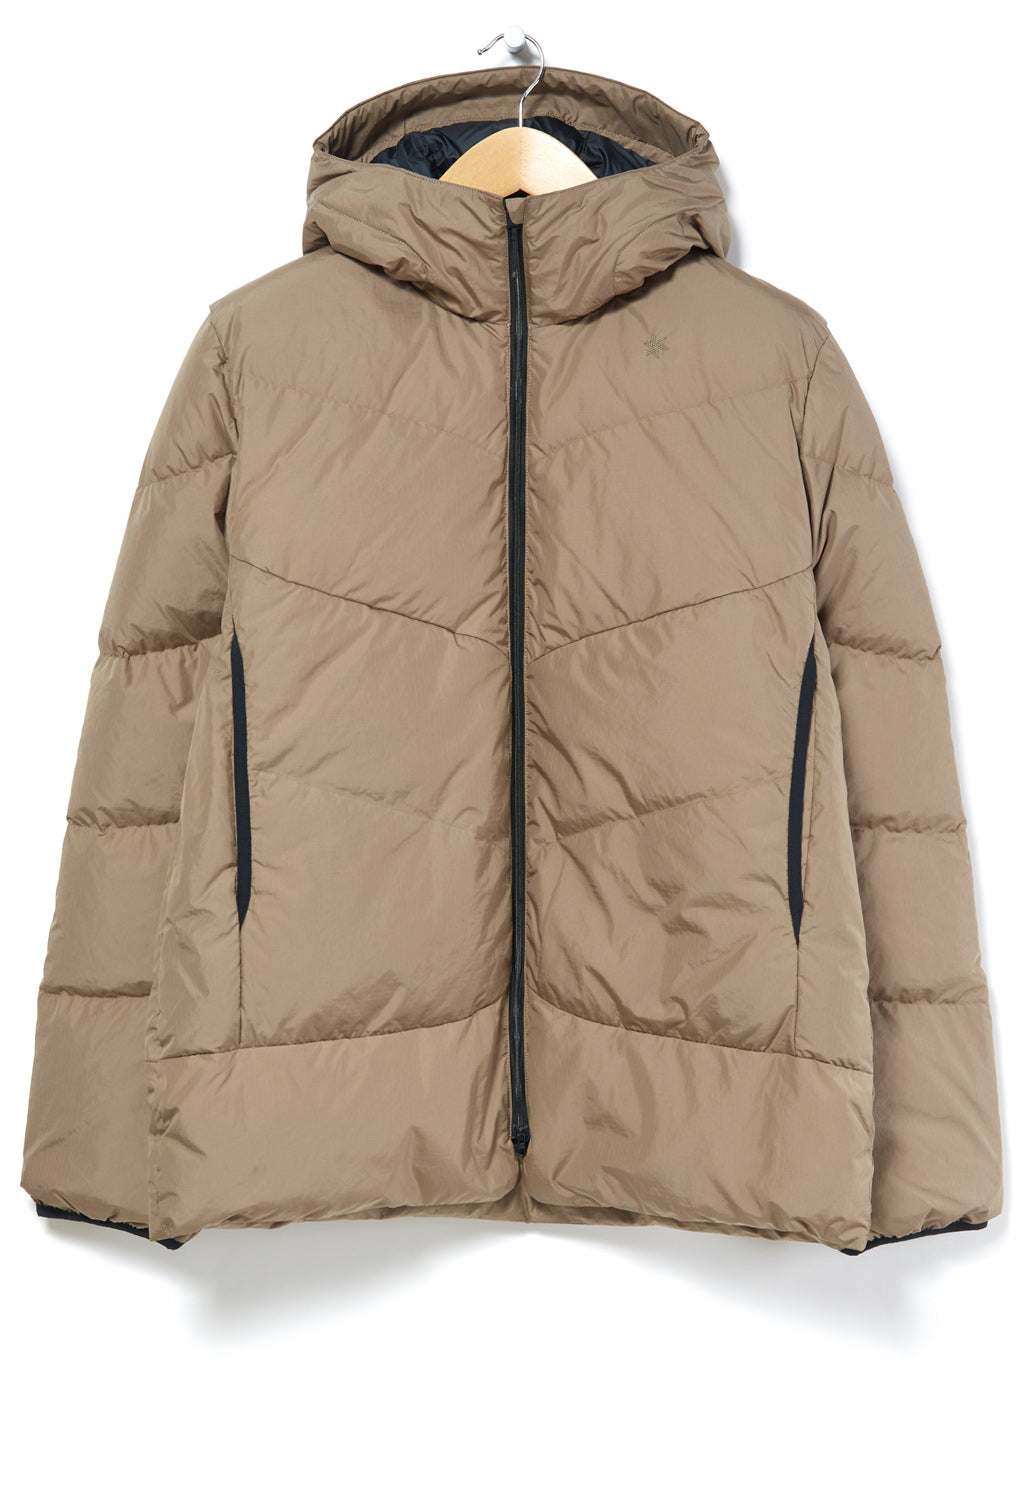 Goldwin Men's Rip-Stop Down Parka Jacket - Desert Taupe – Outsiders ...